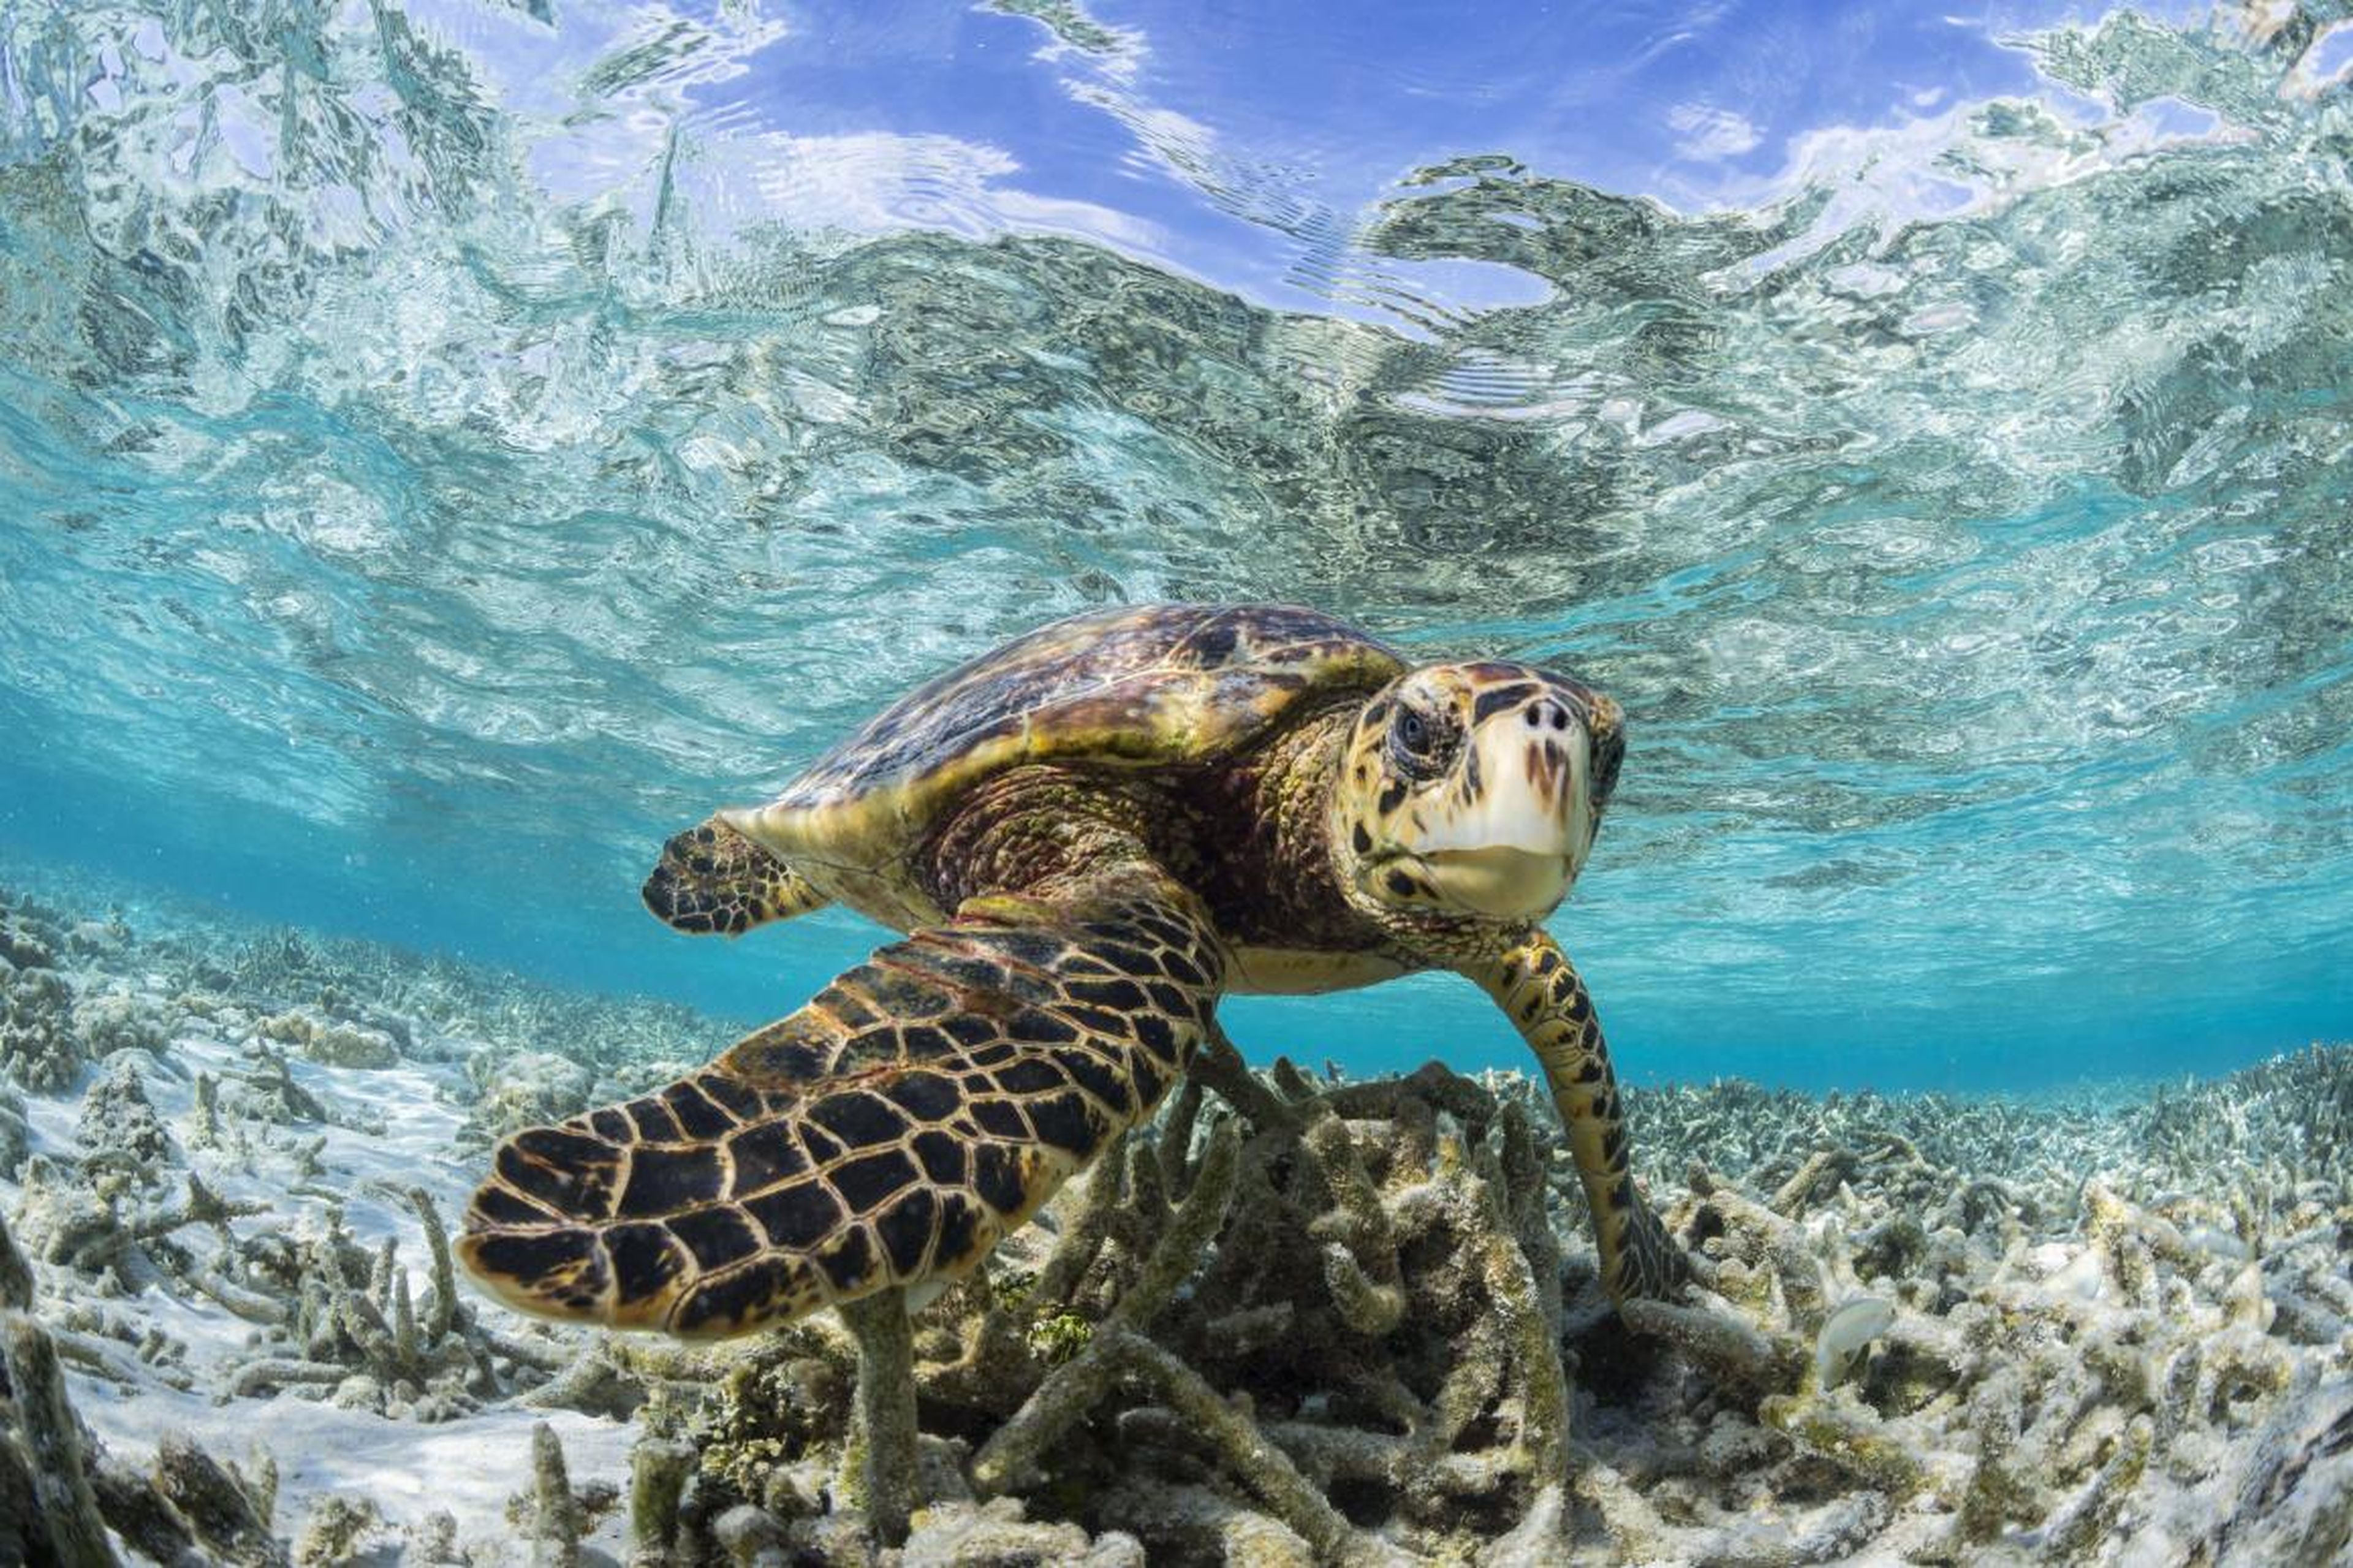 This shot of a Hawksbill turtle in a shallow lagoon off the Maldives earned Spiers the silver medal.